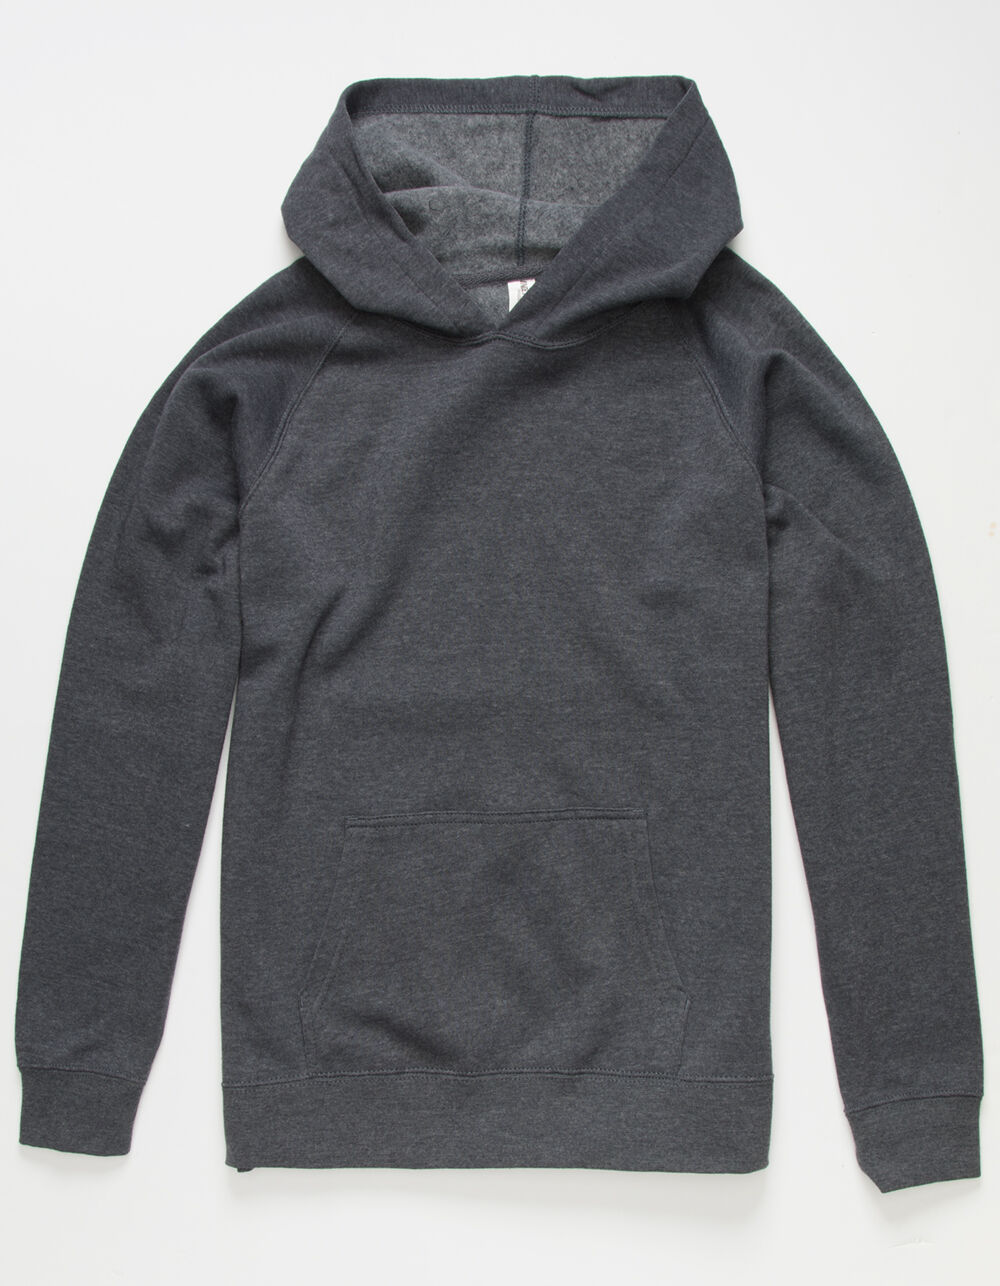 INDEPENDENT TRADING COMPANY Boys Navy Pullover Hoodie - NAVY | Tillys